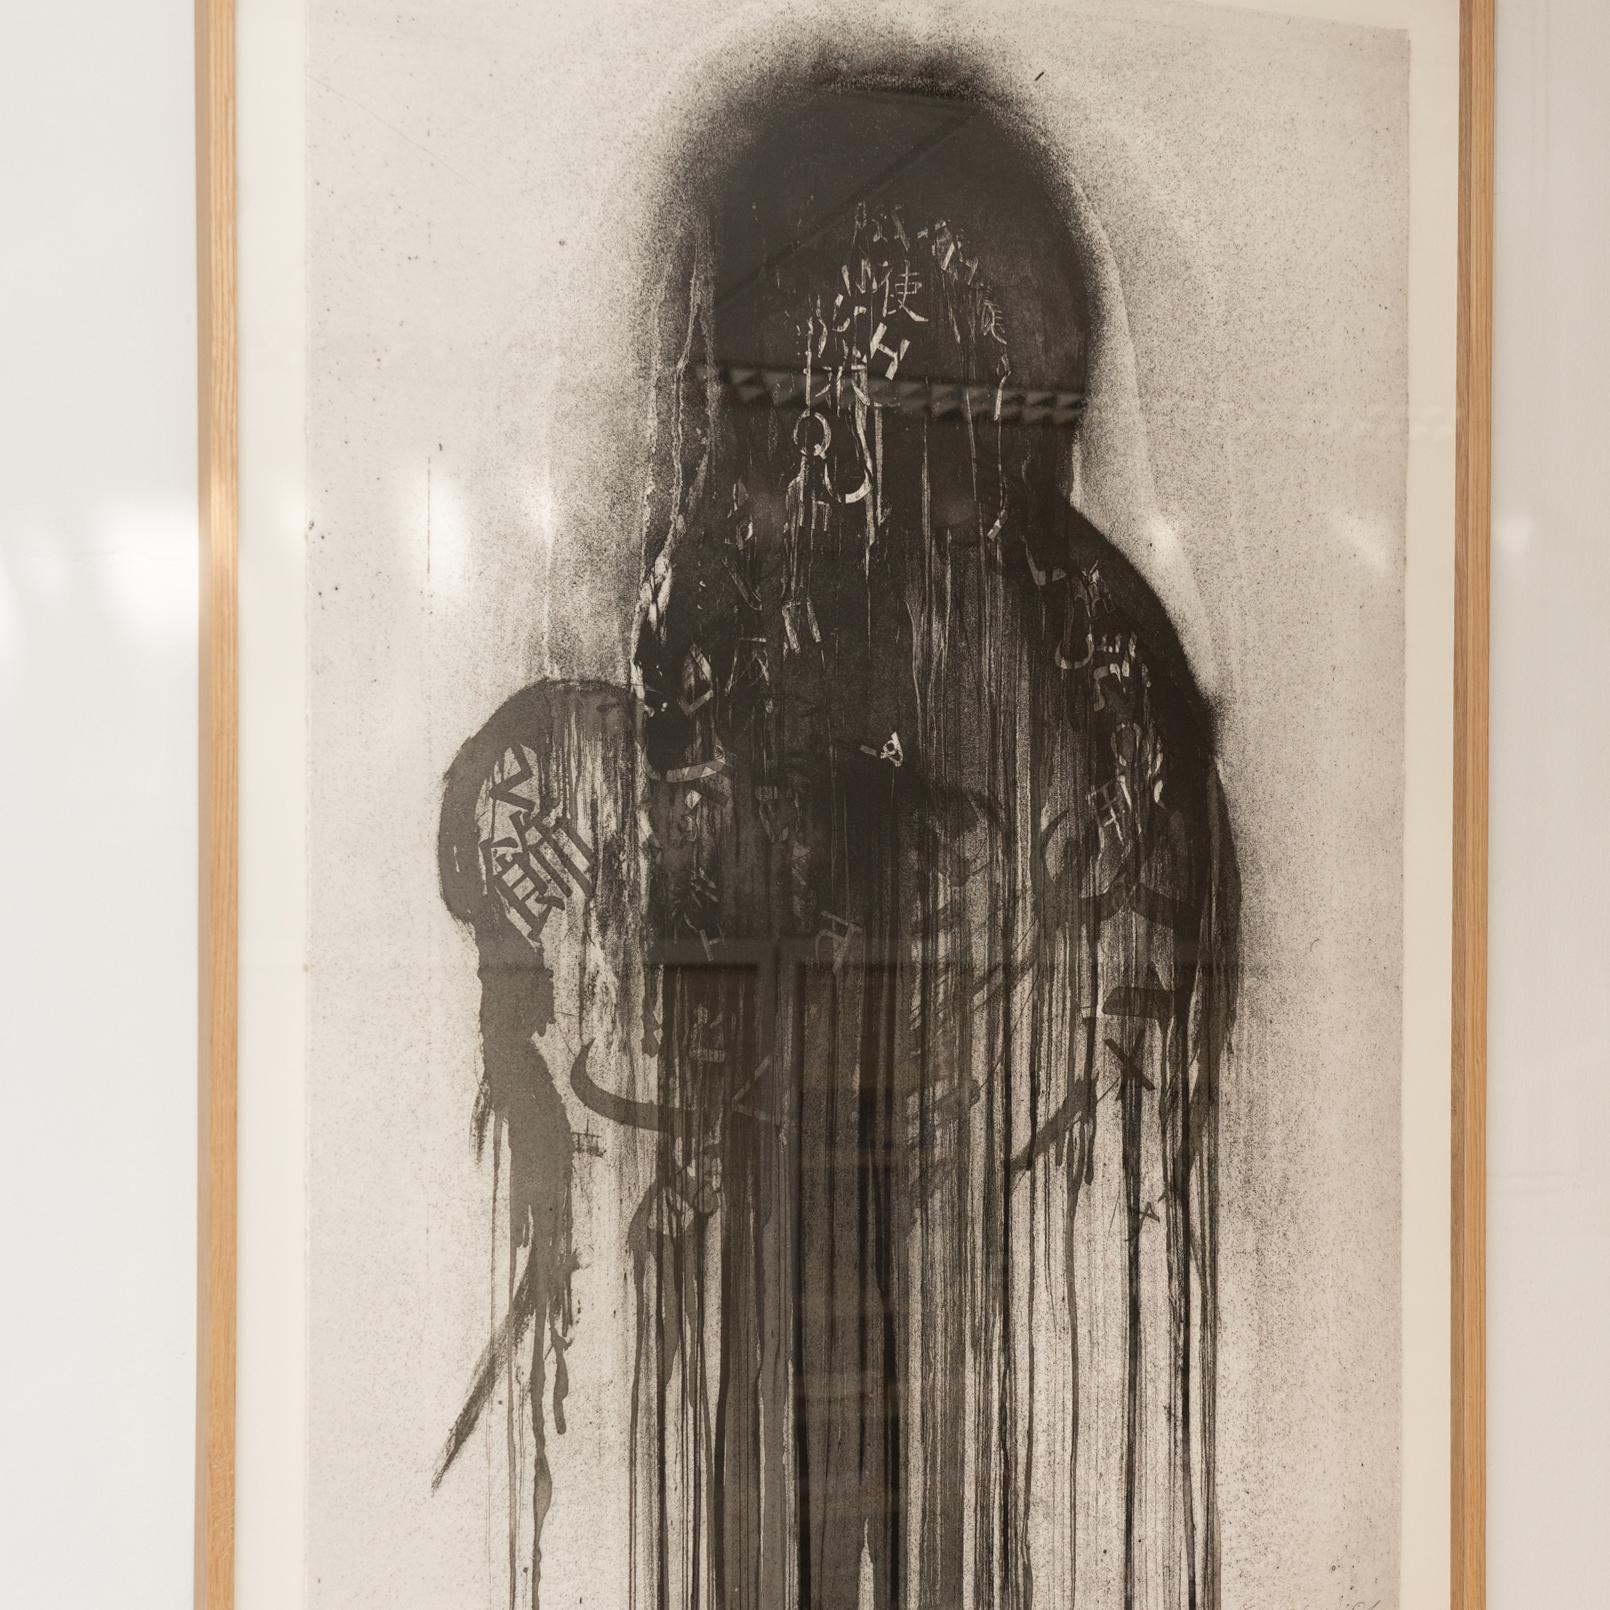 Framed 'Untilted 3' Photoetching on Hahnemühle paper.

Made by Jaume Plensa in Spain, circa 2021.

In original condition, with minor wear consistent with age and use, preserving a beautiful patina.

Numbered and hand signed by the artist,